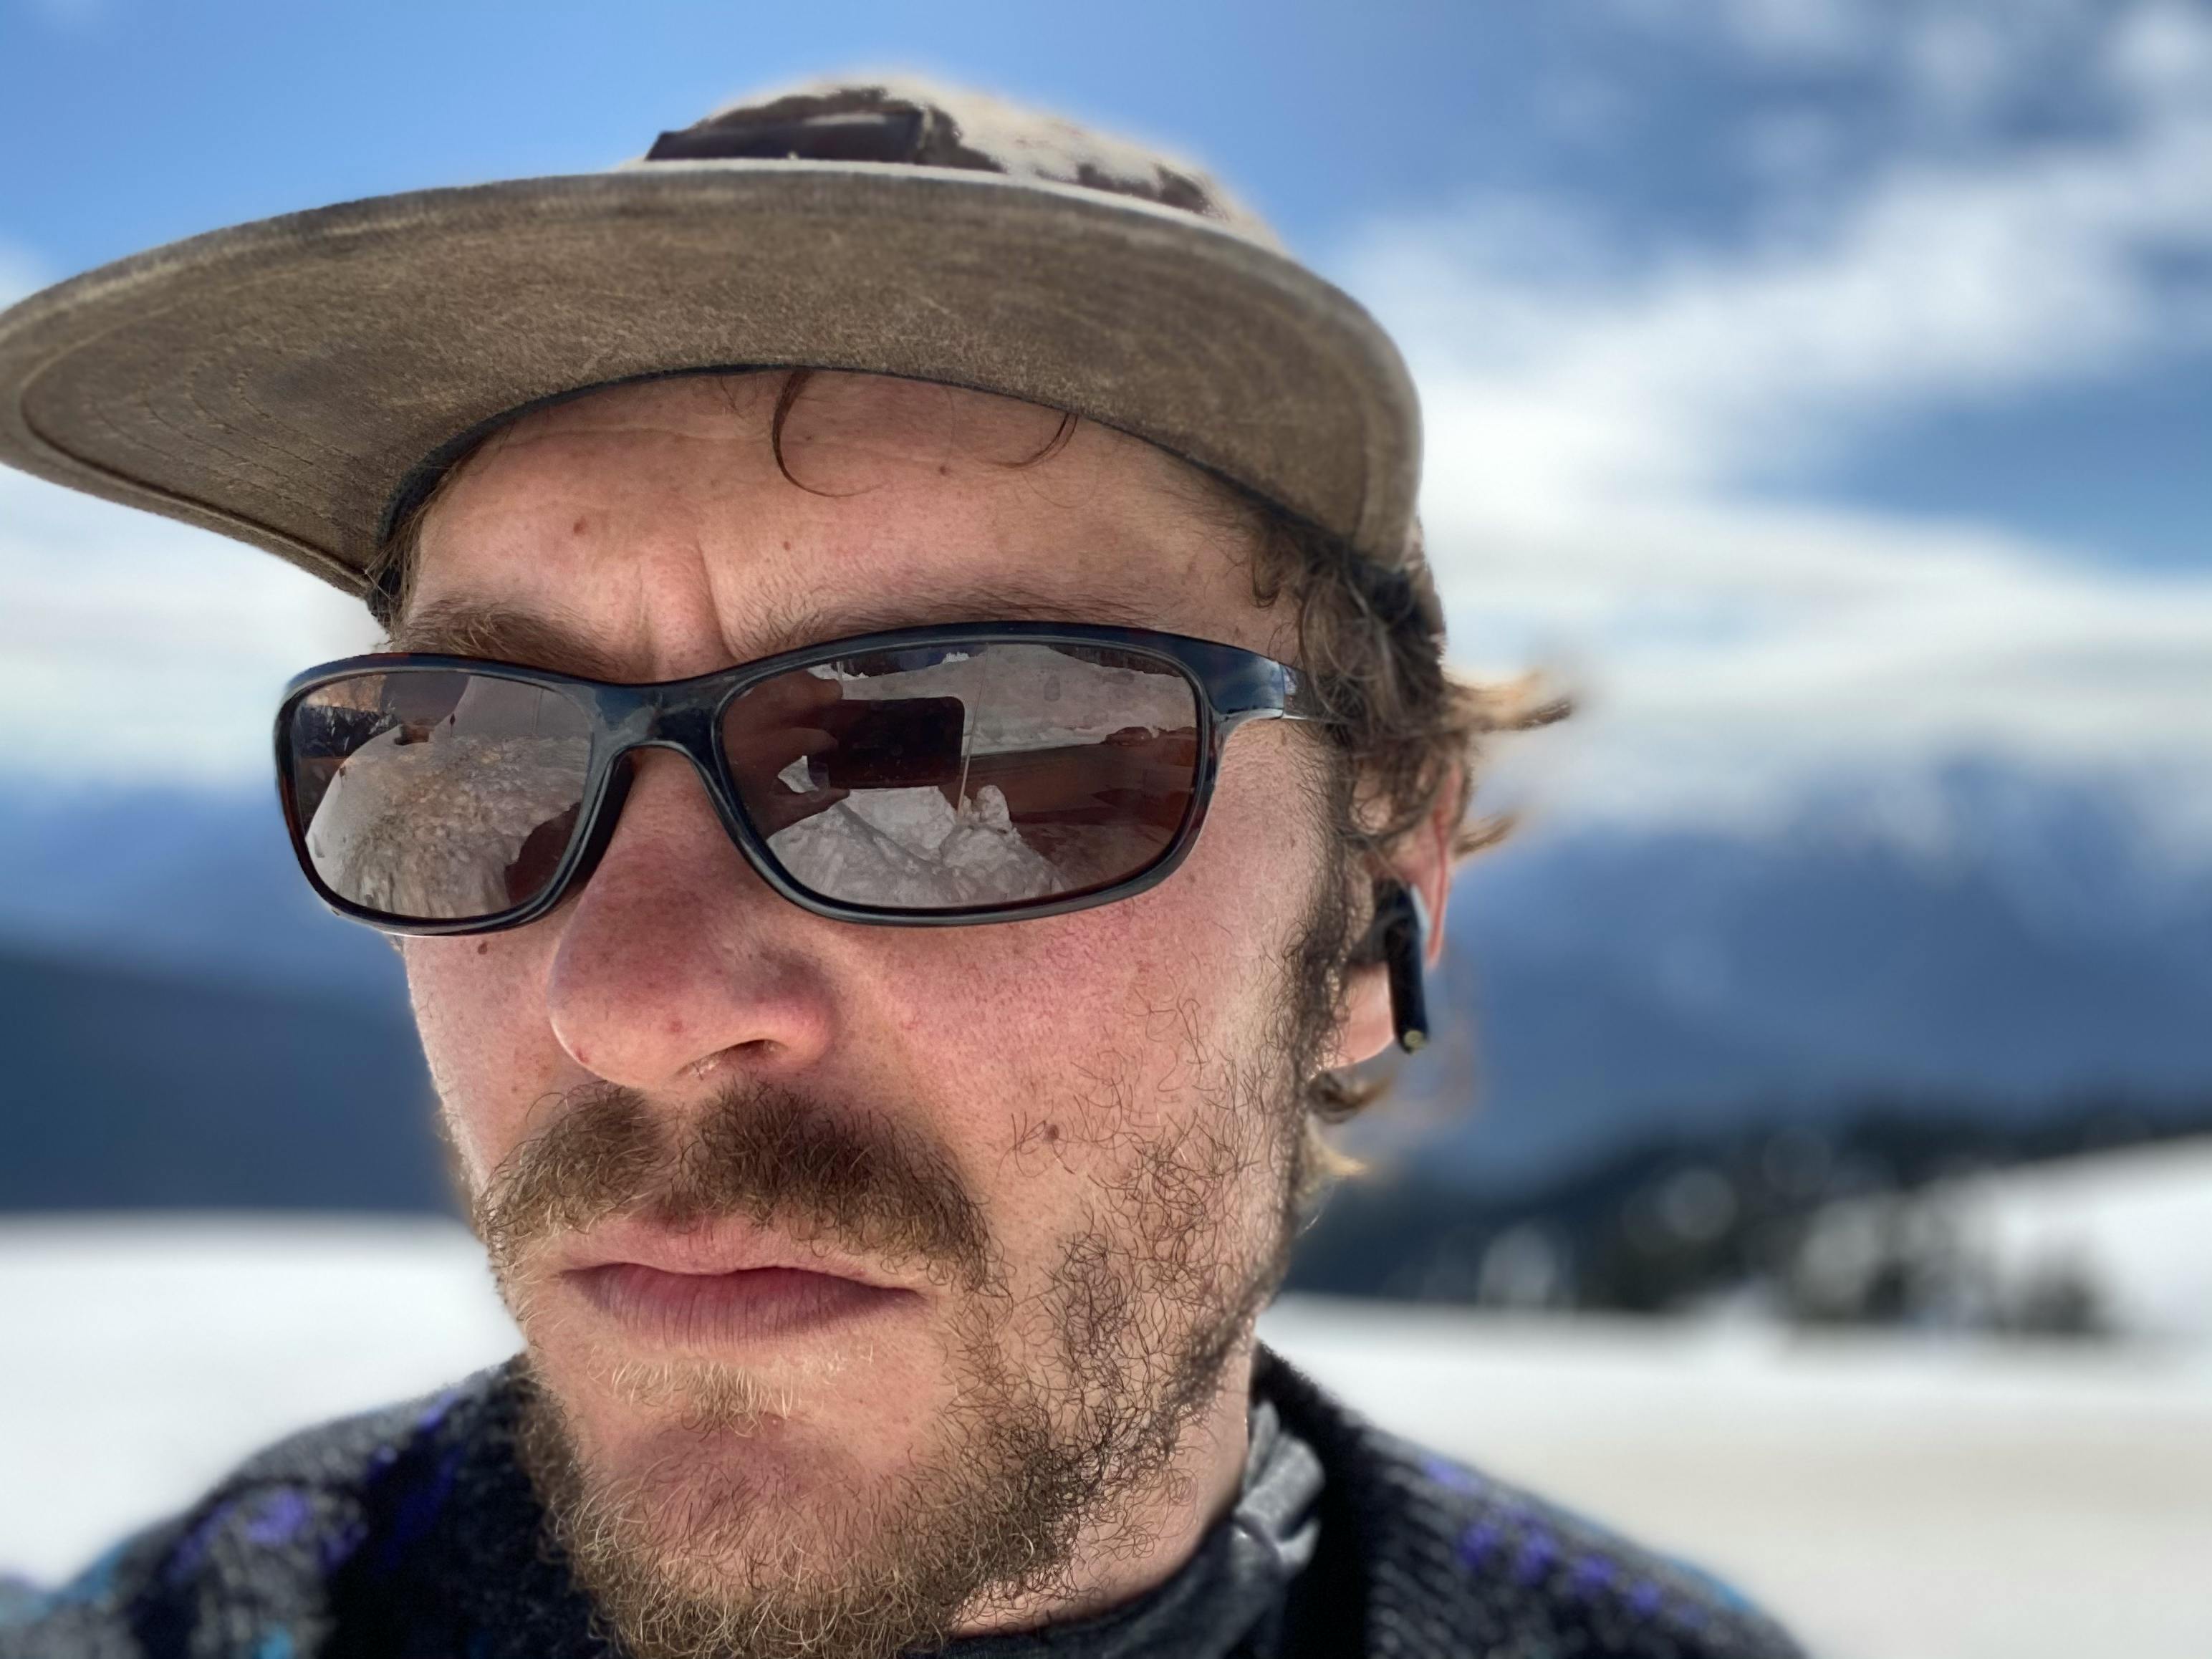 The author takes a selfie of him in a hat and sunglasses on the snow.